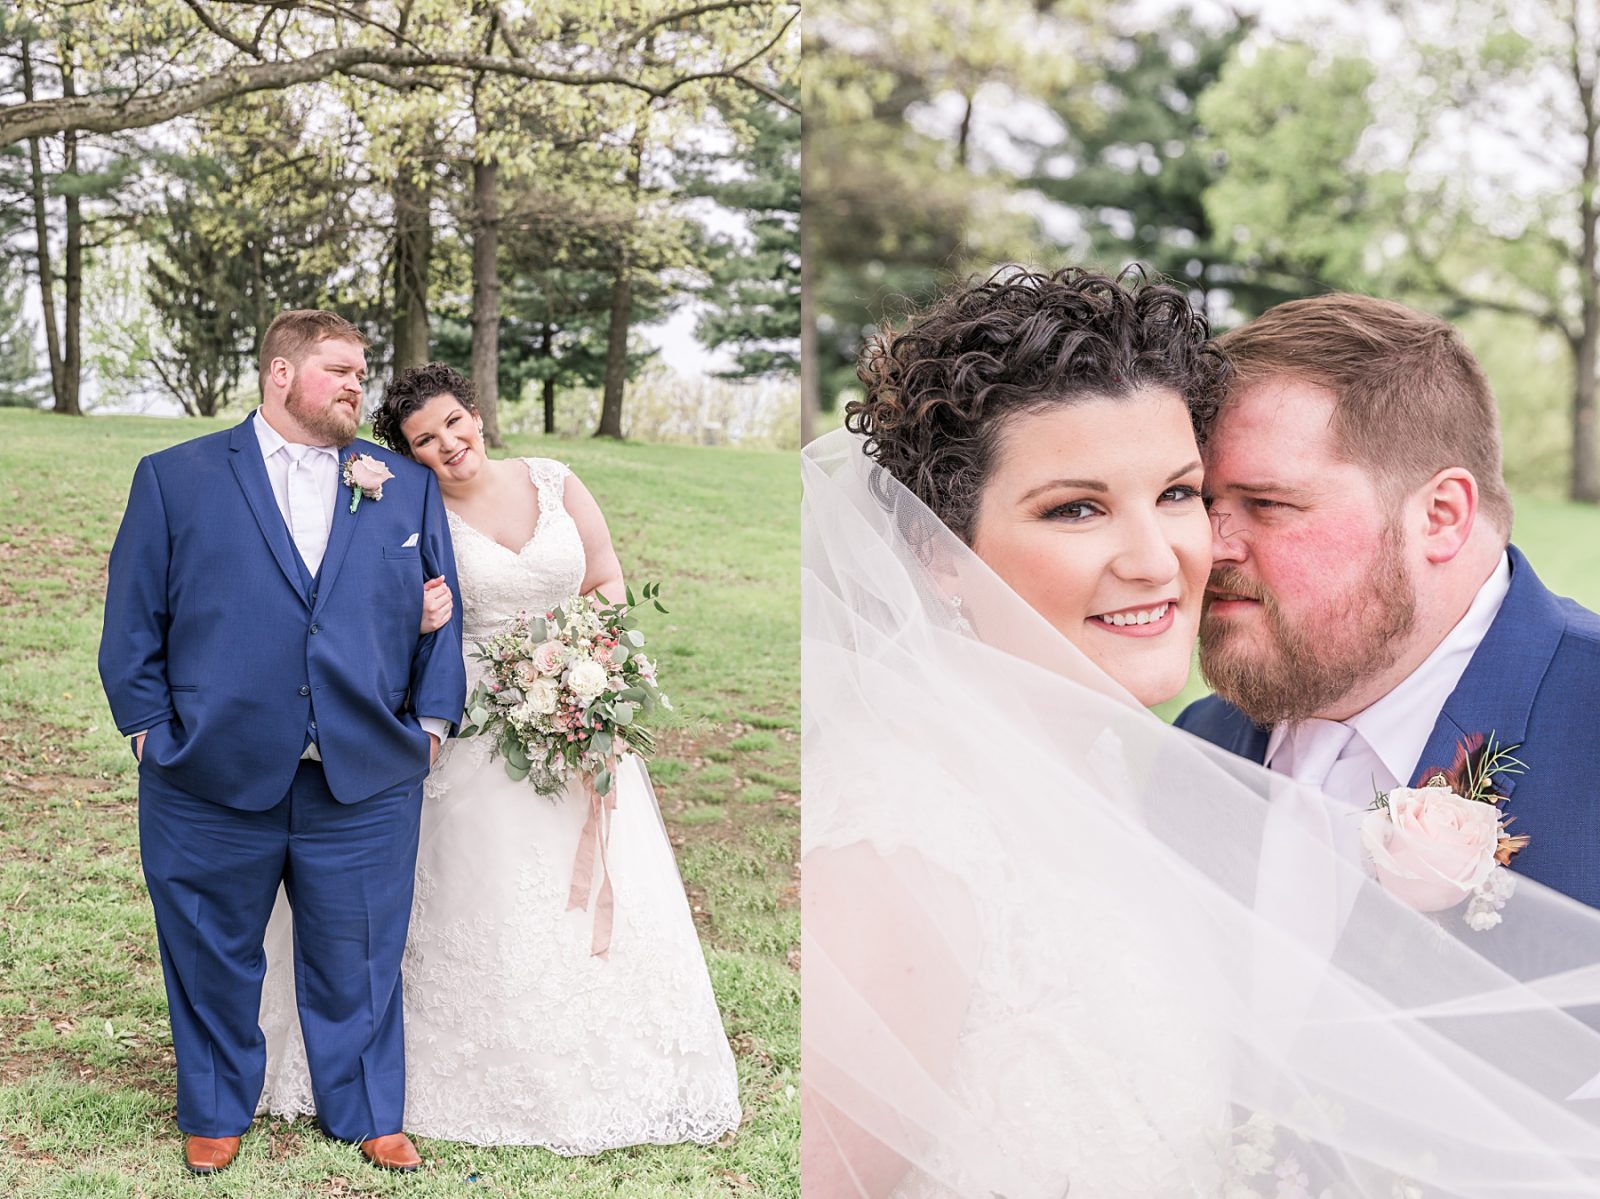 Wedding photography by Diana Gramlich, bride and groom portraits